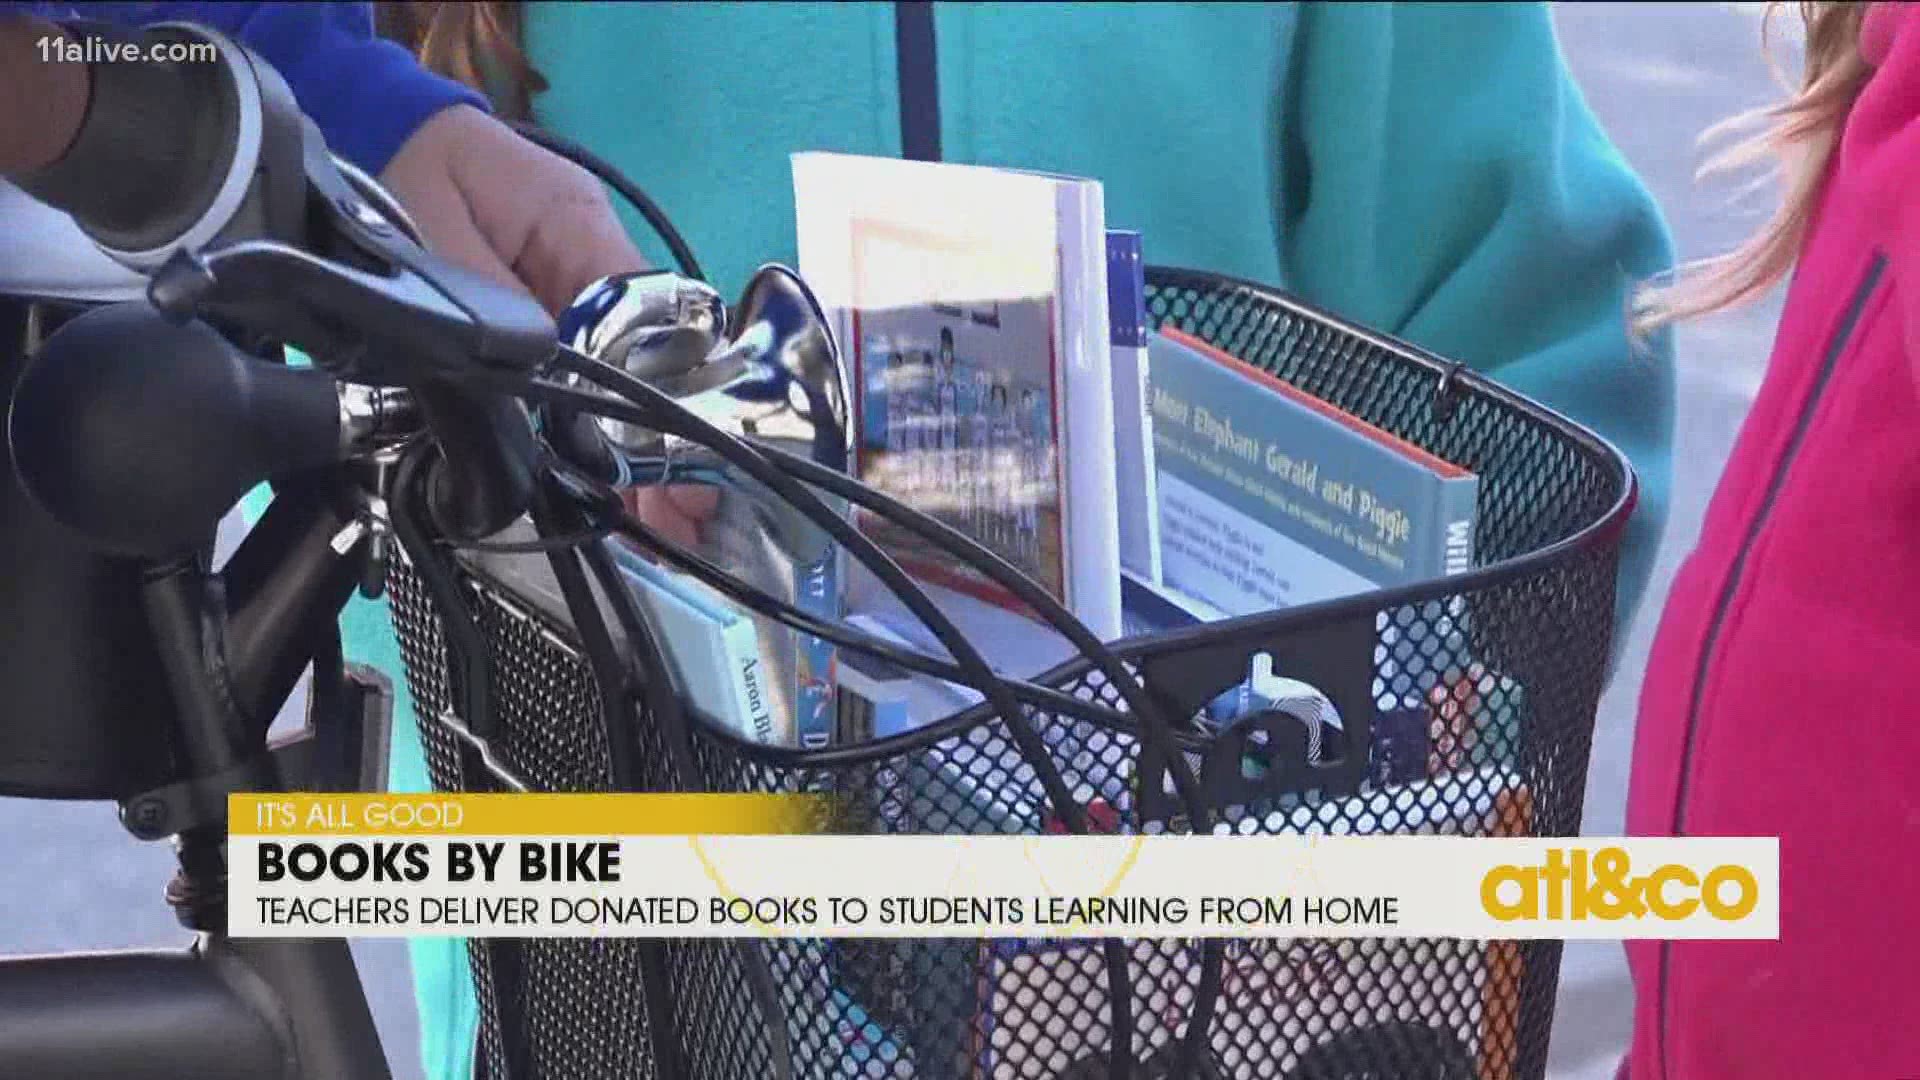 Thanks to a bicycle donation, teachers are riding around town with a basket of books to deliver to students learning from home.